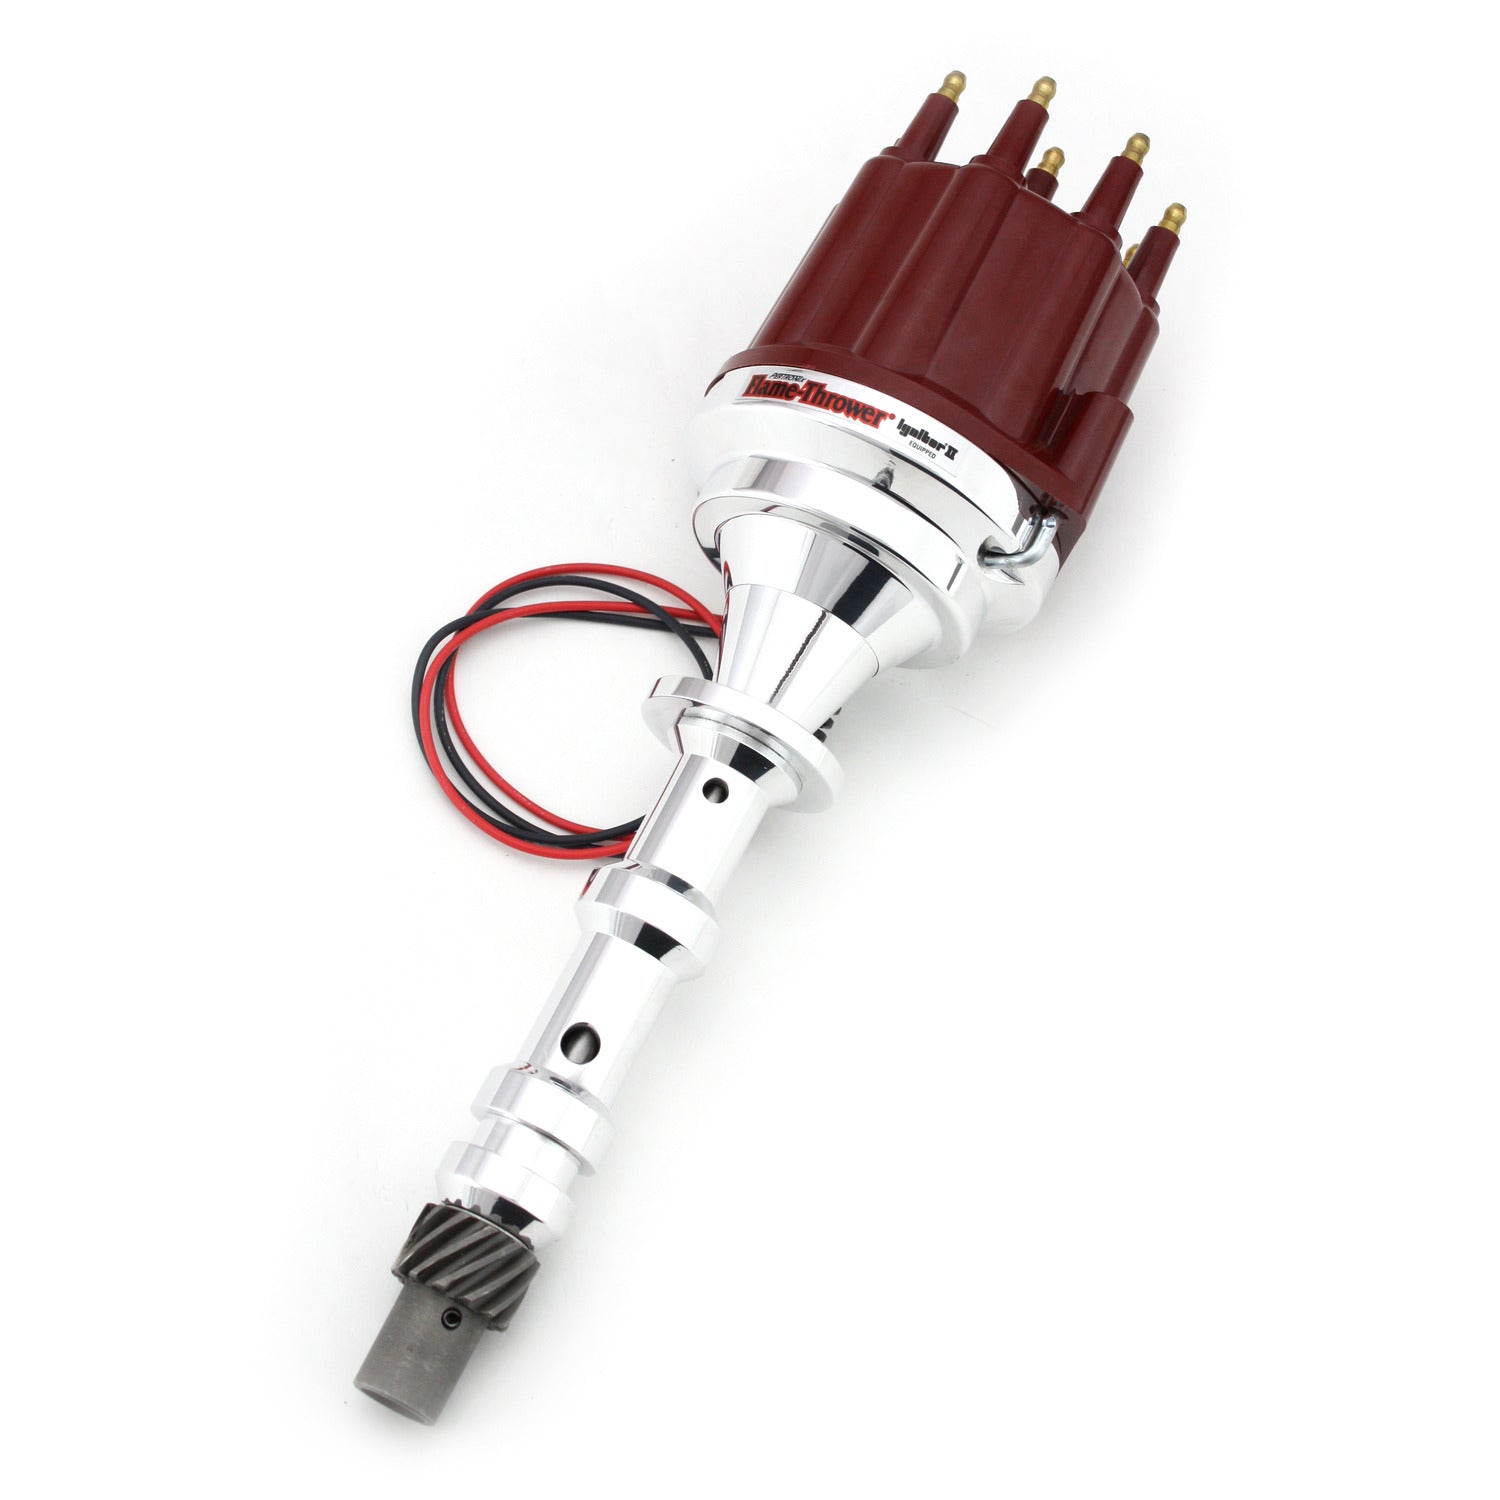 PerTronix D101811 Flame-Thrower Electronic Distributor Billet Chevrolet 409 Plug and Play with Ignitor II Technology Non Vacuum Advance Red Male Cap